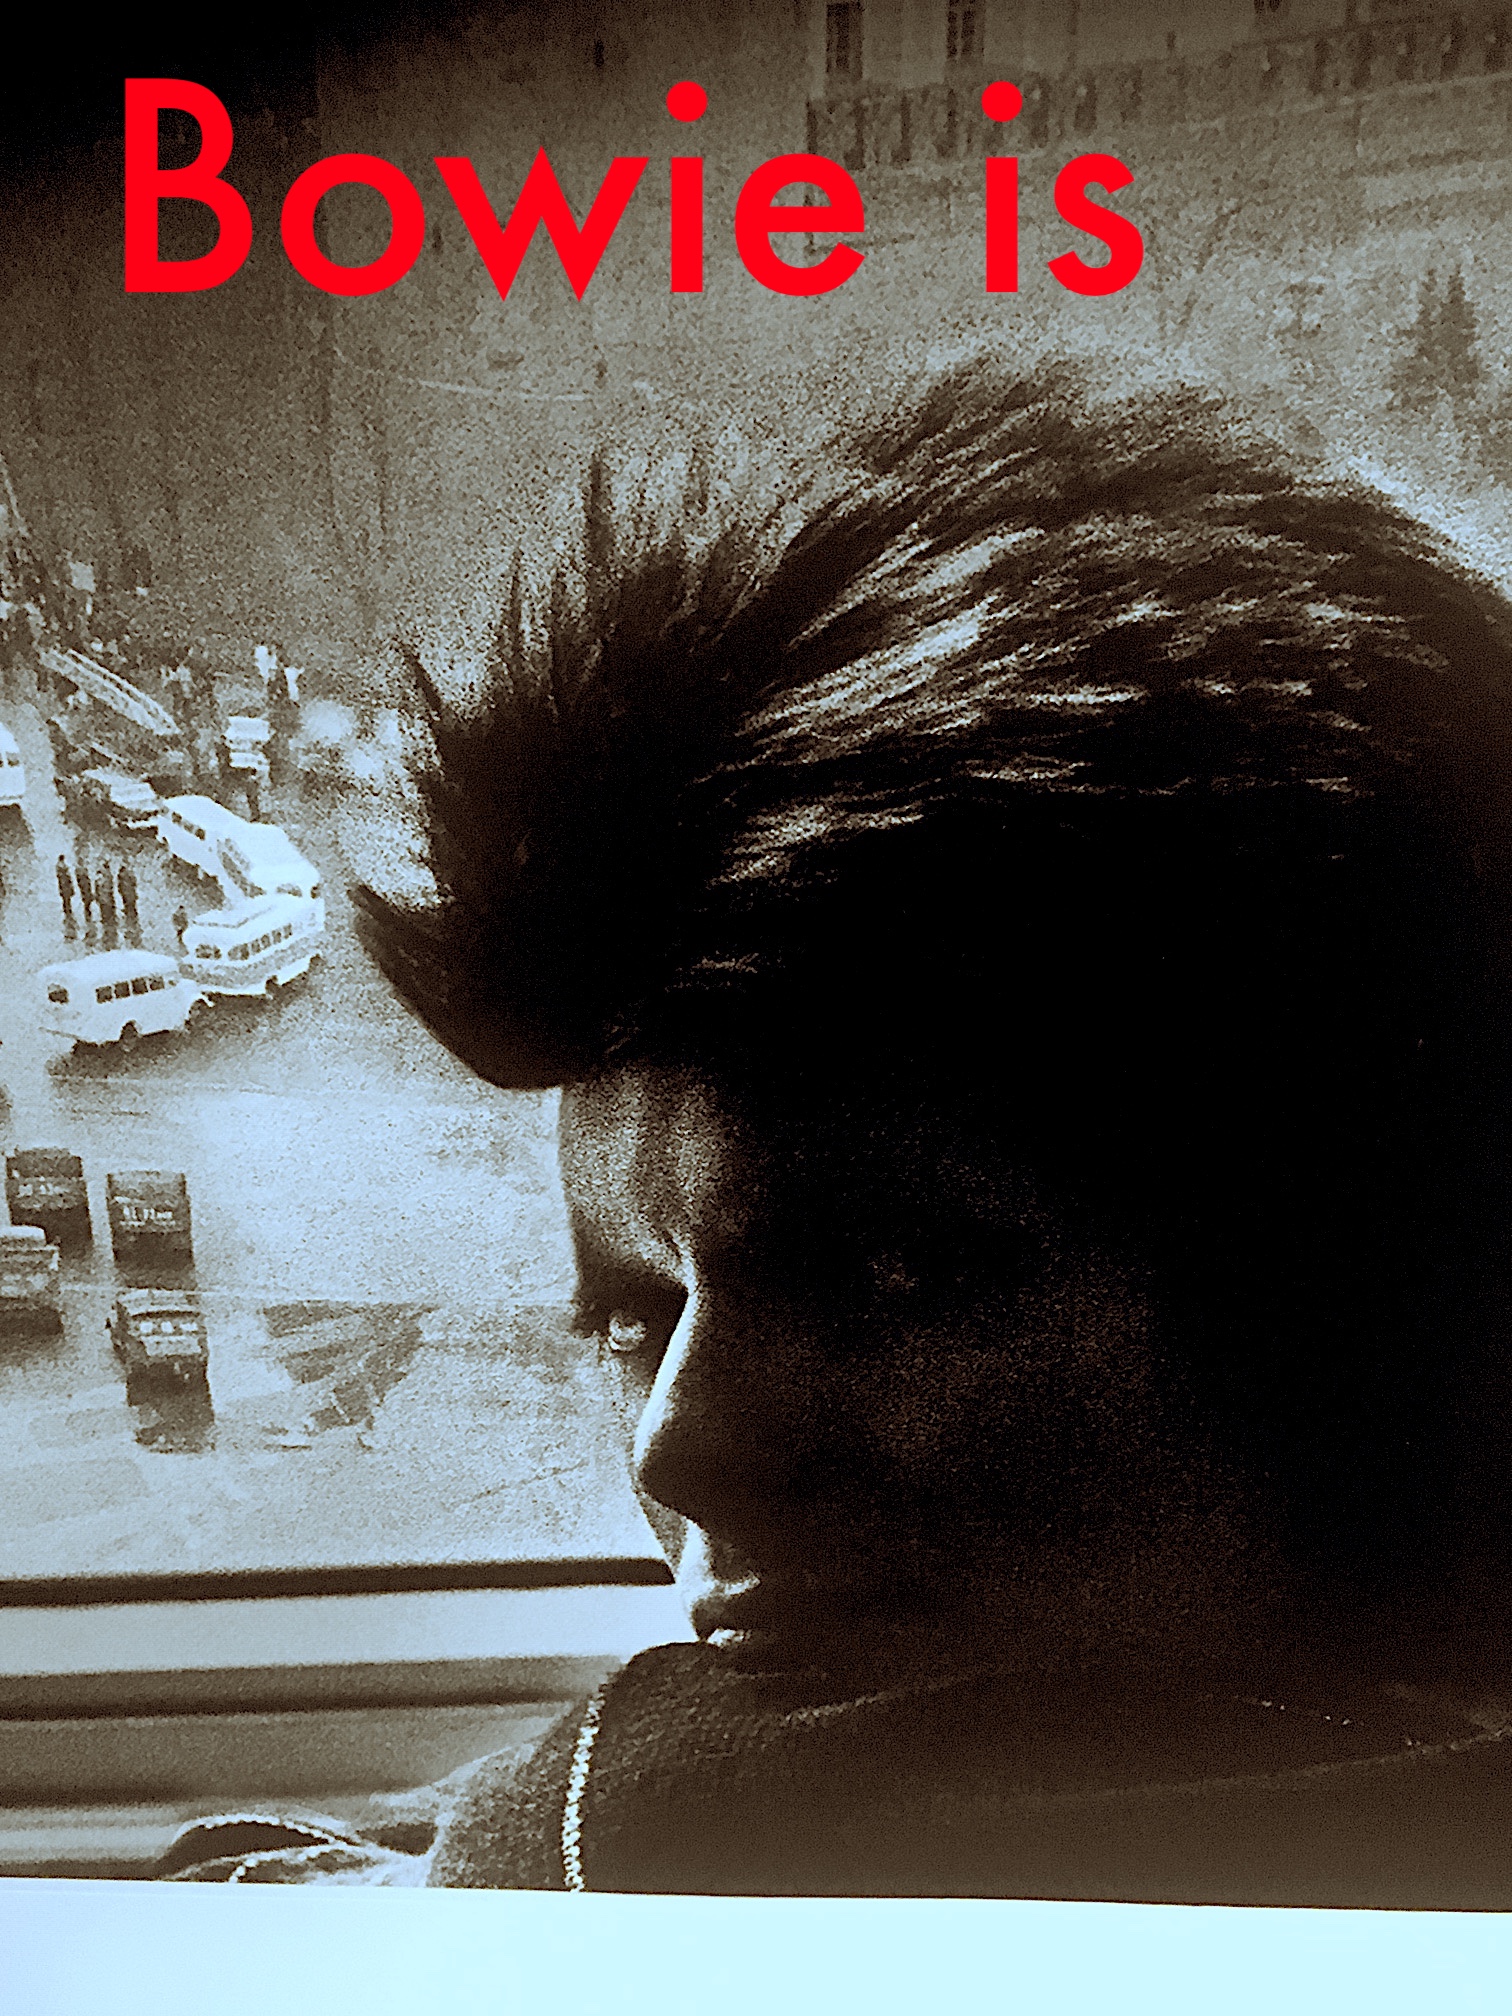 The Wirebender presents – Bowie is